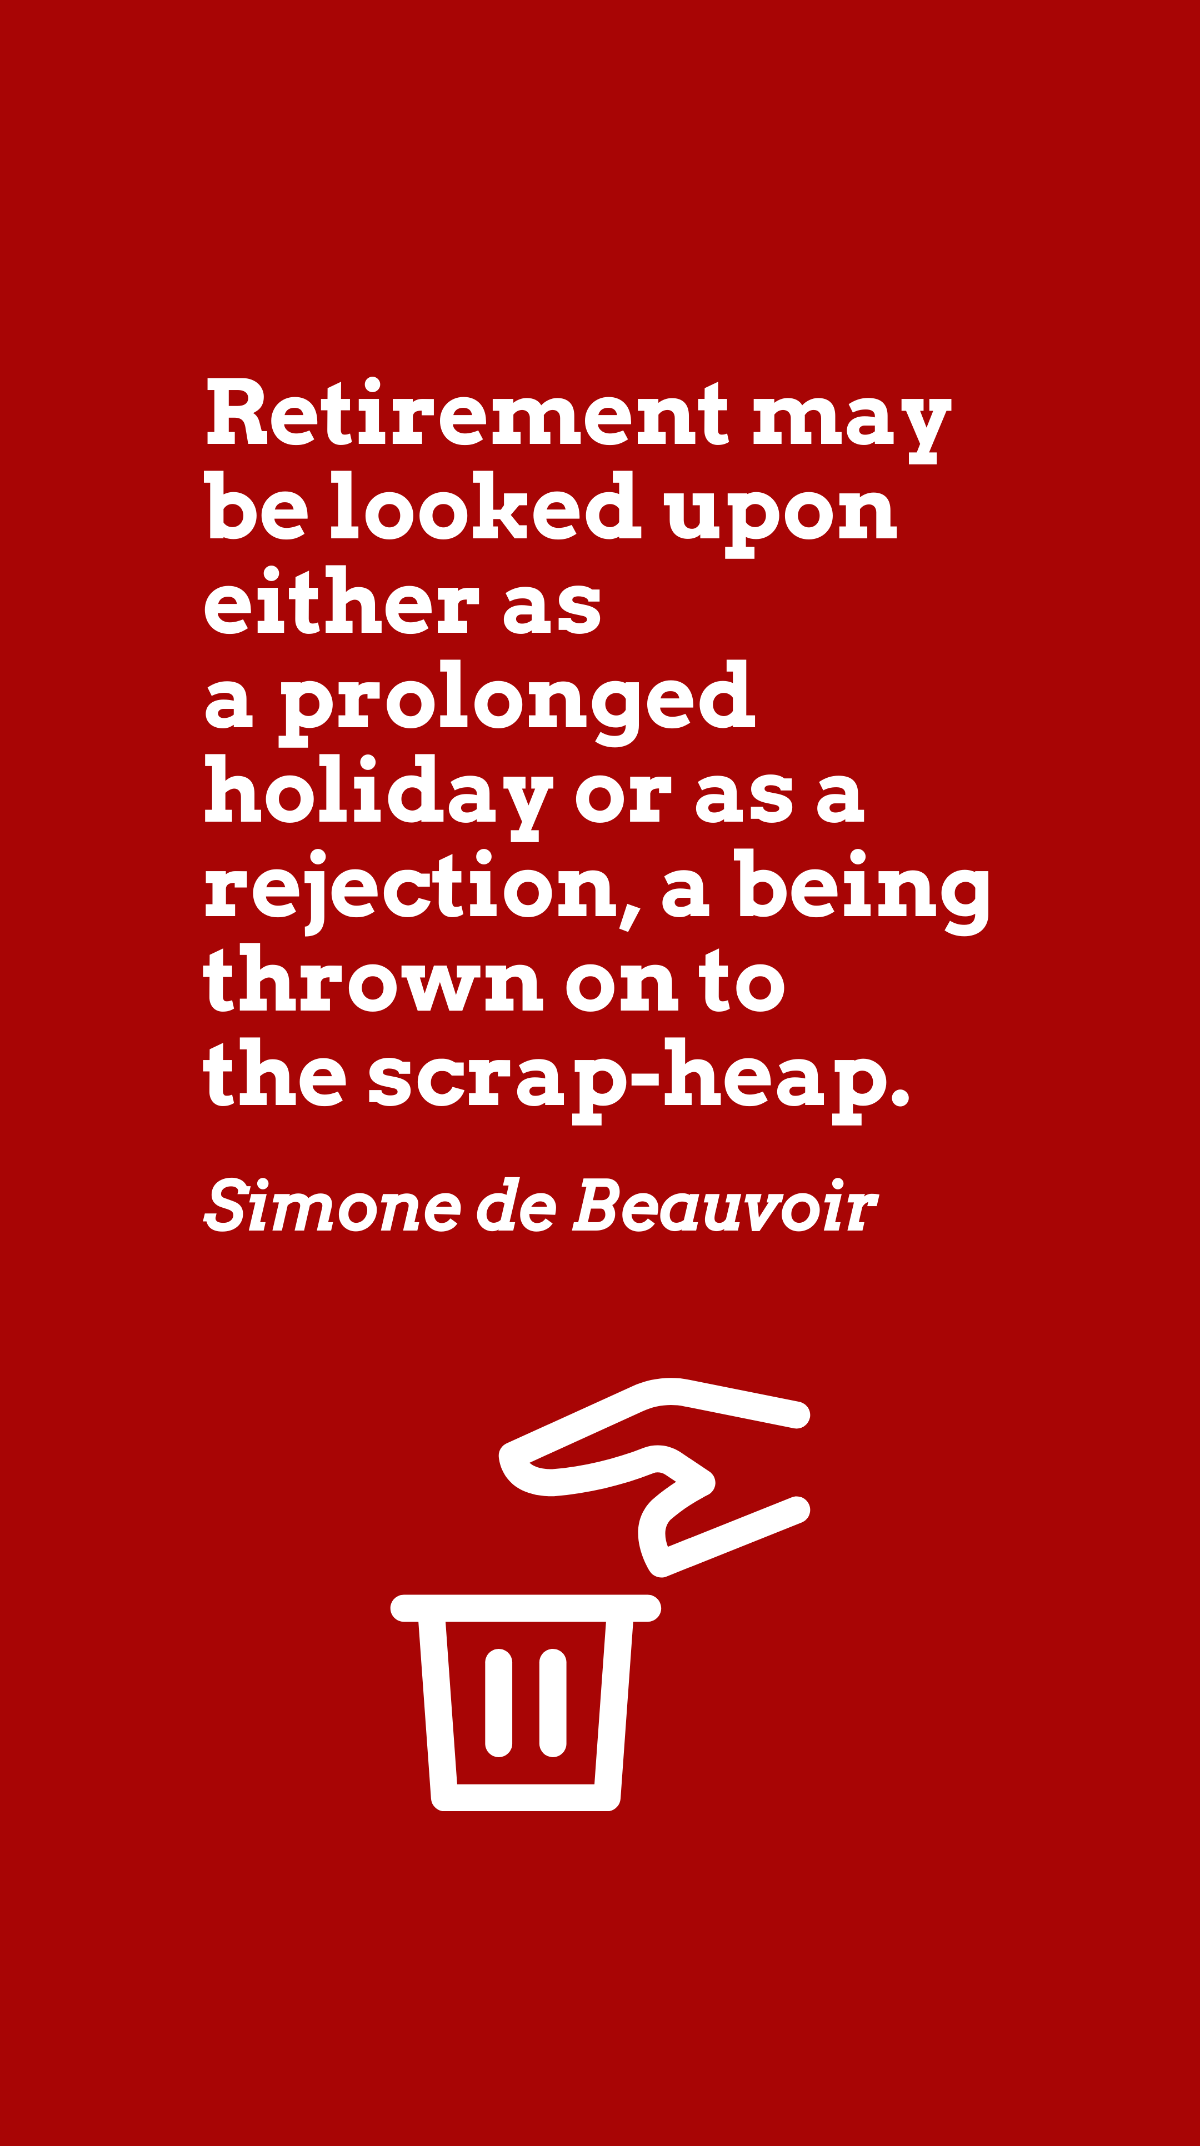 Simone de Beauvoir - Retirement may be looked upon either as a prolonged holiday or as a rejection, a being thrown on to the scrap-heap.